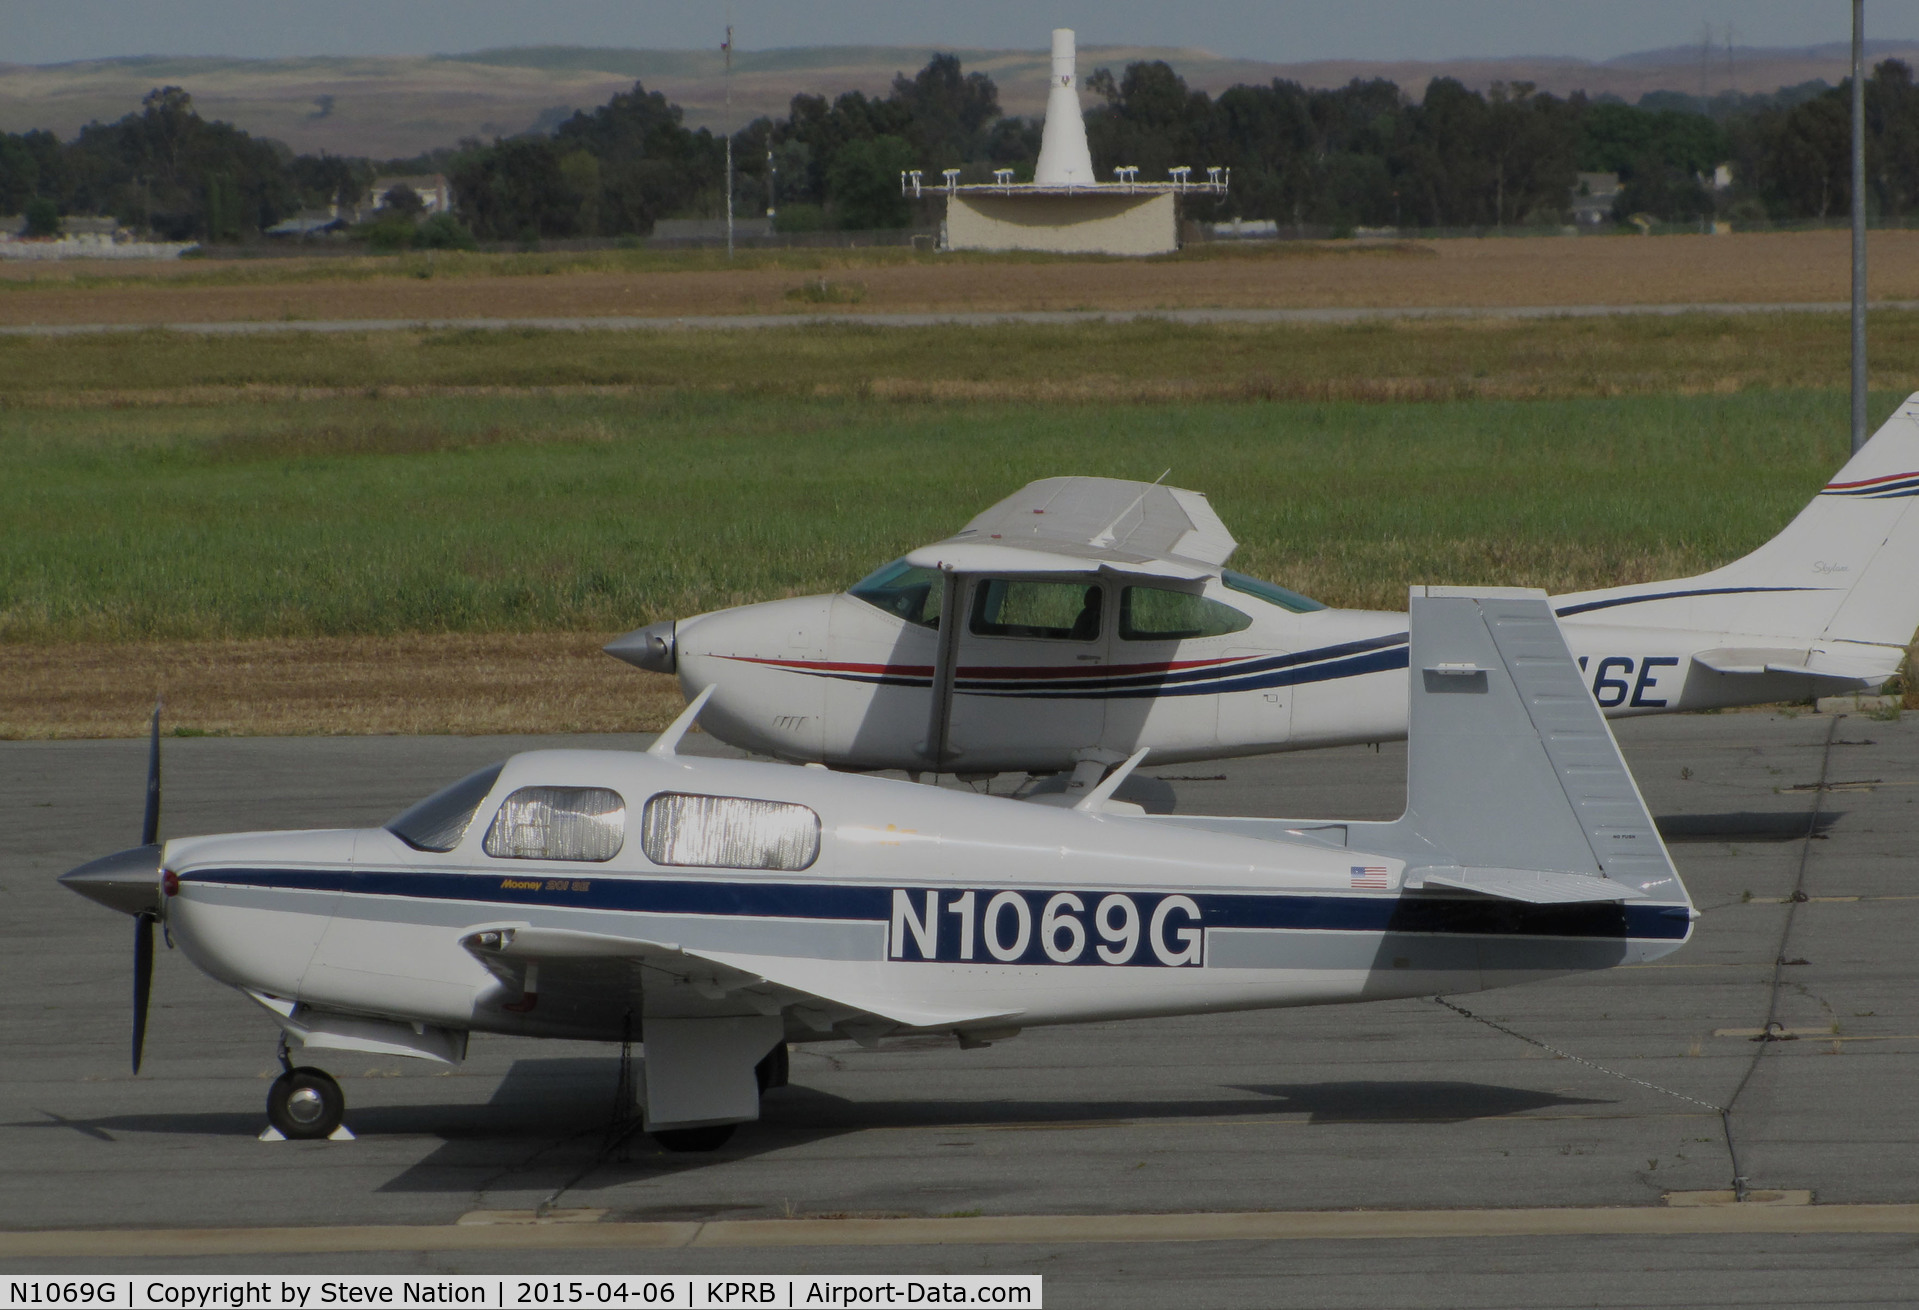 N1069G, 1989 Mooney M20J 201 C/N 24-3135, Washington State-based 1989 Mooney M20J visiting @ Paso Robles Municipal Airport, CA (photographed from terminal stairway)